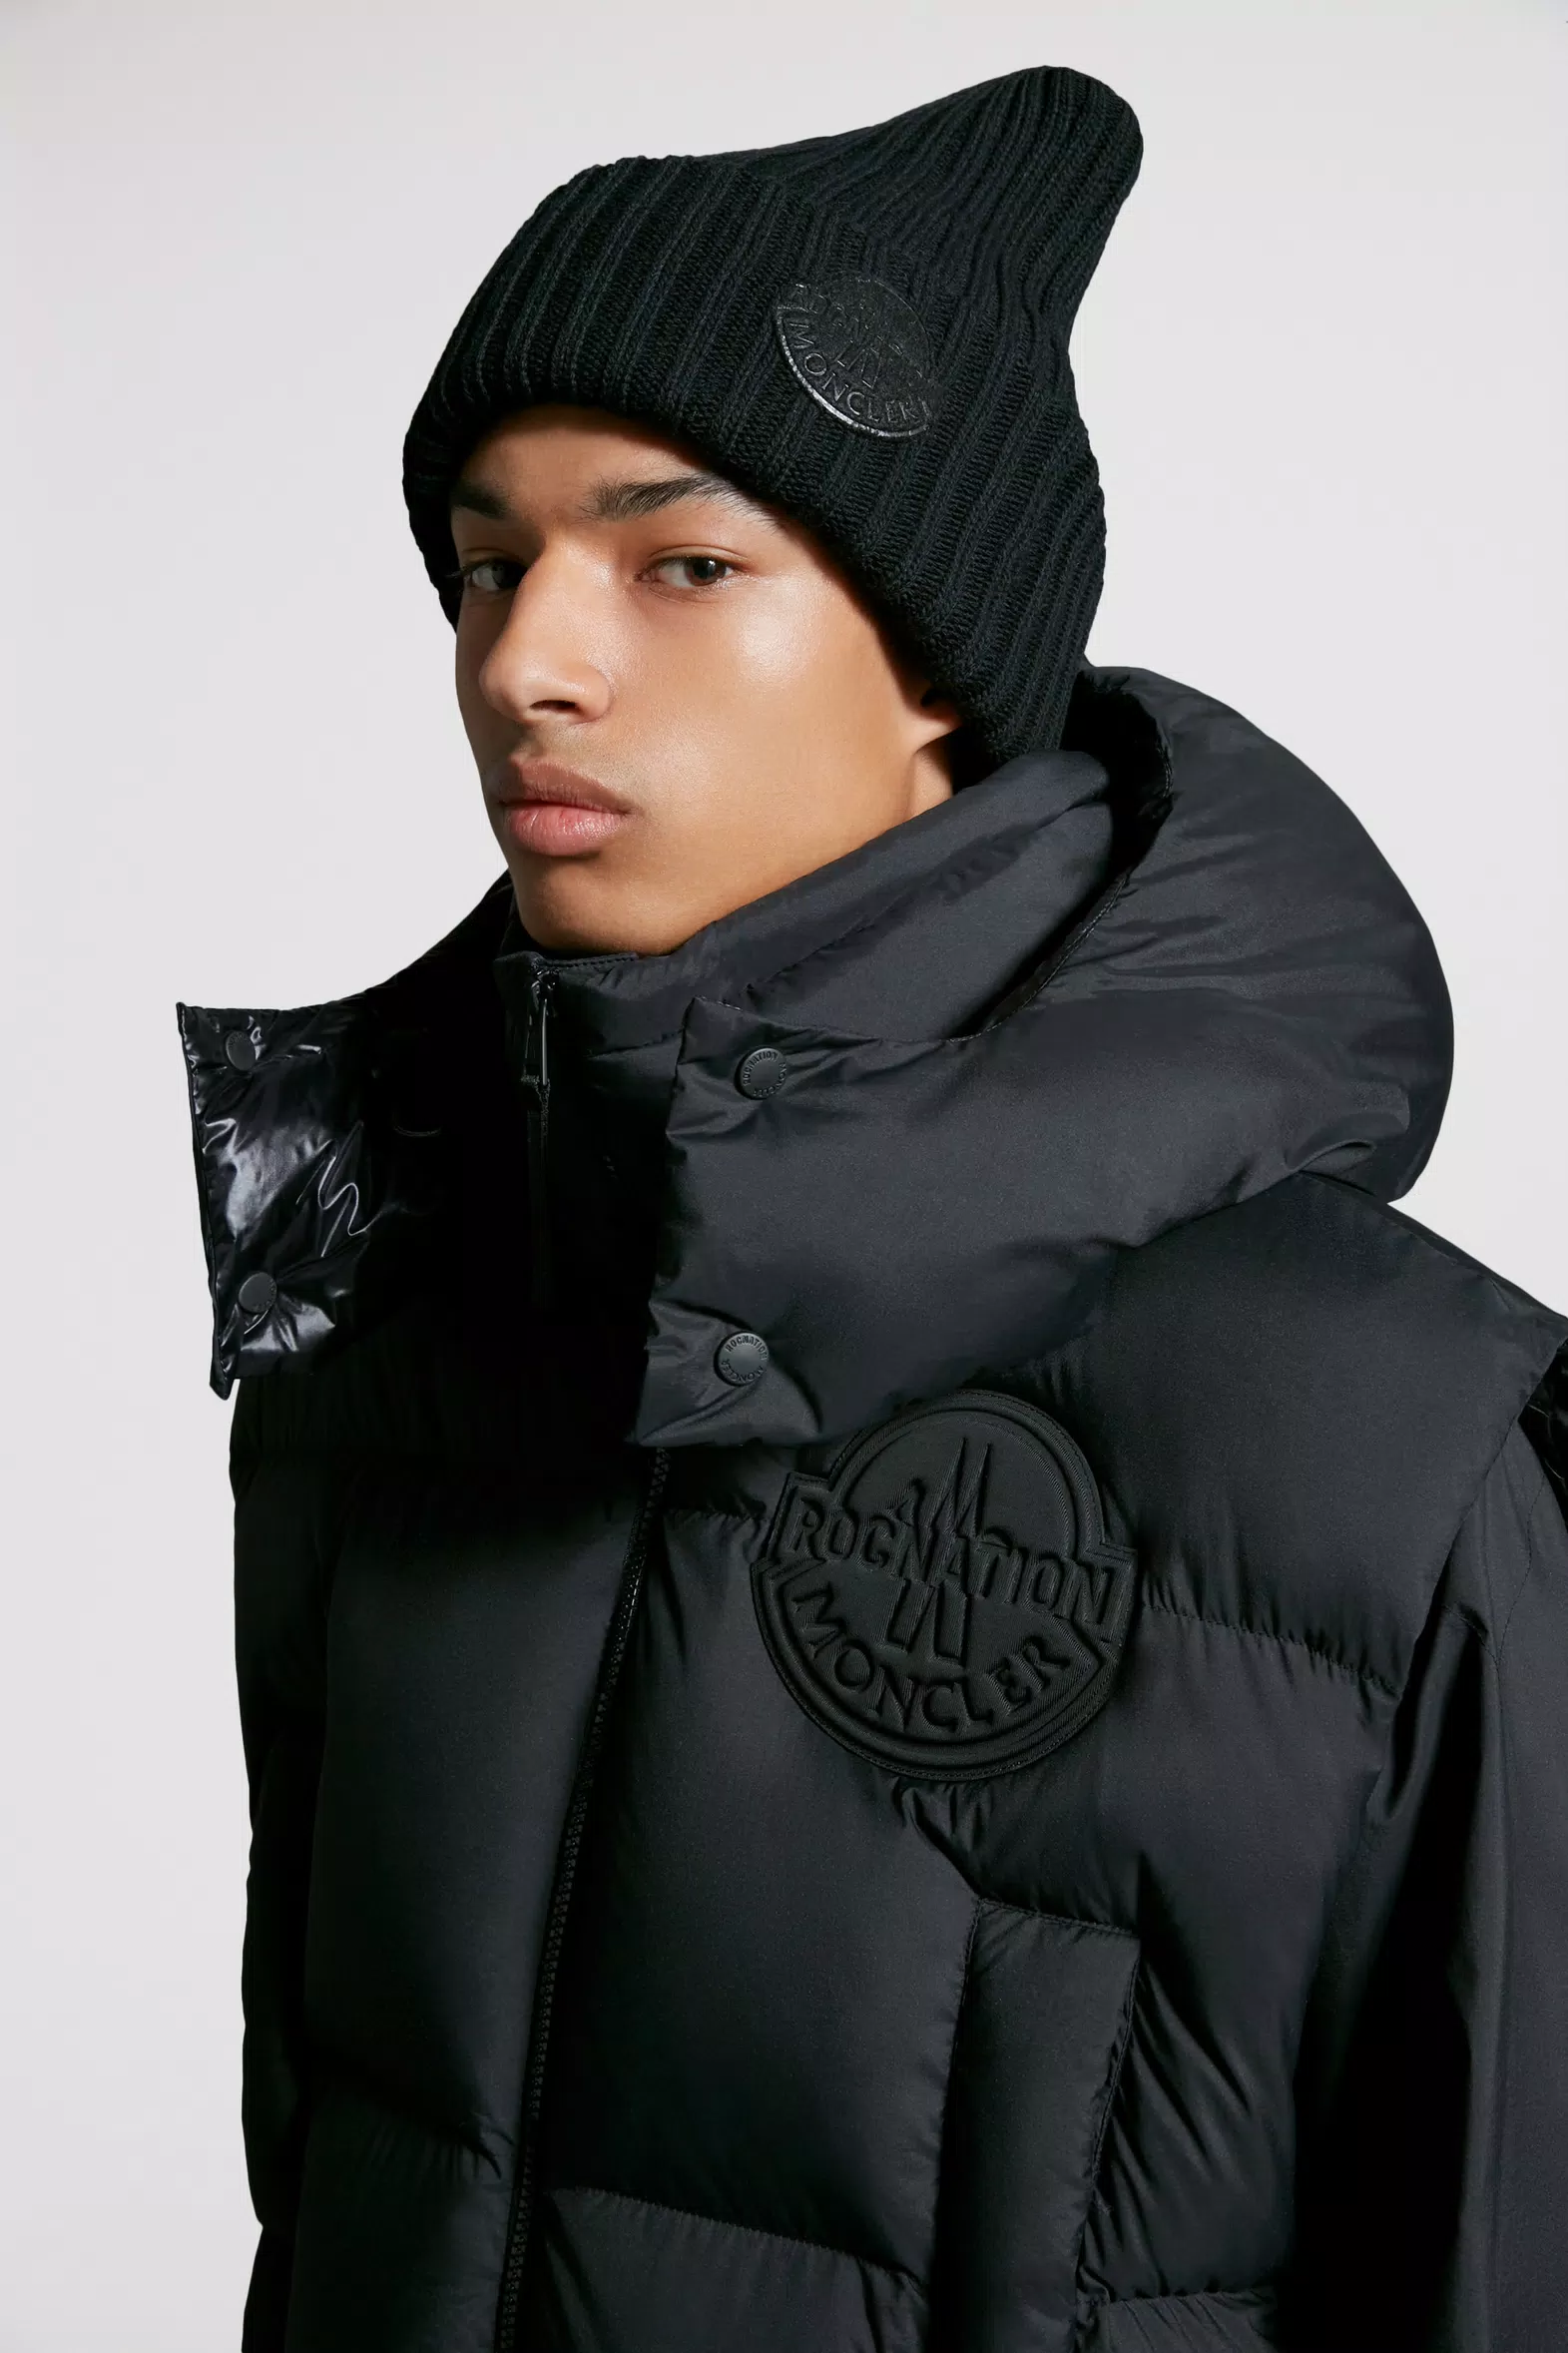 Black Wool Beanie - Moncler x Roc Nation designed by Jay-Z for Genius ...